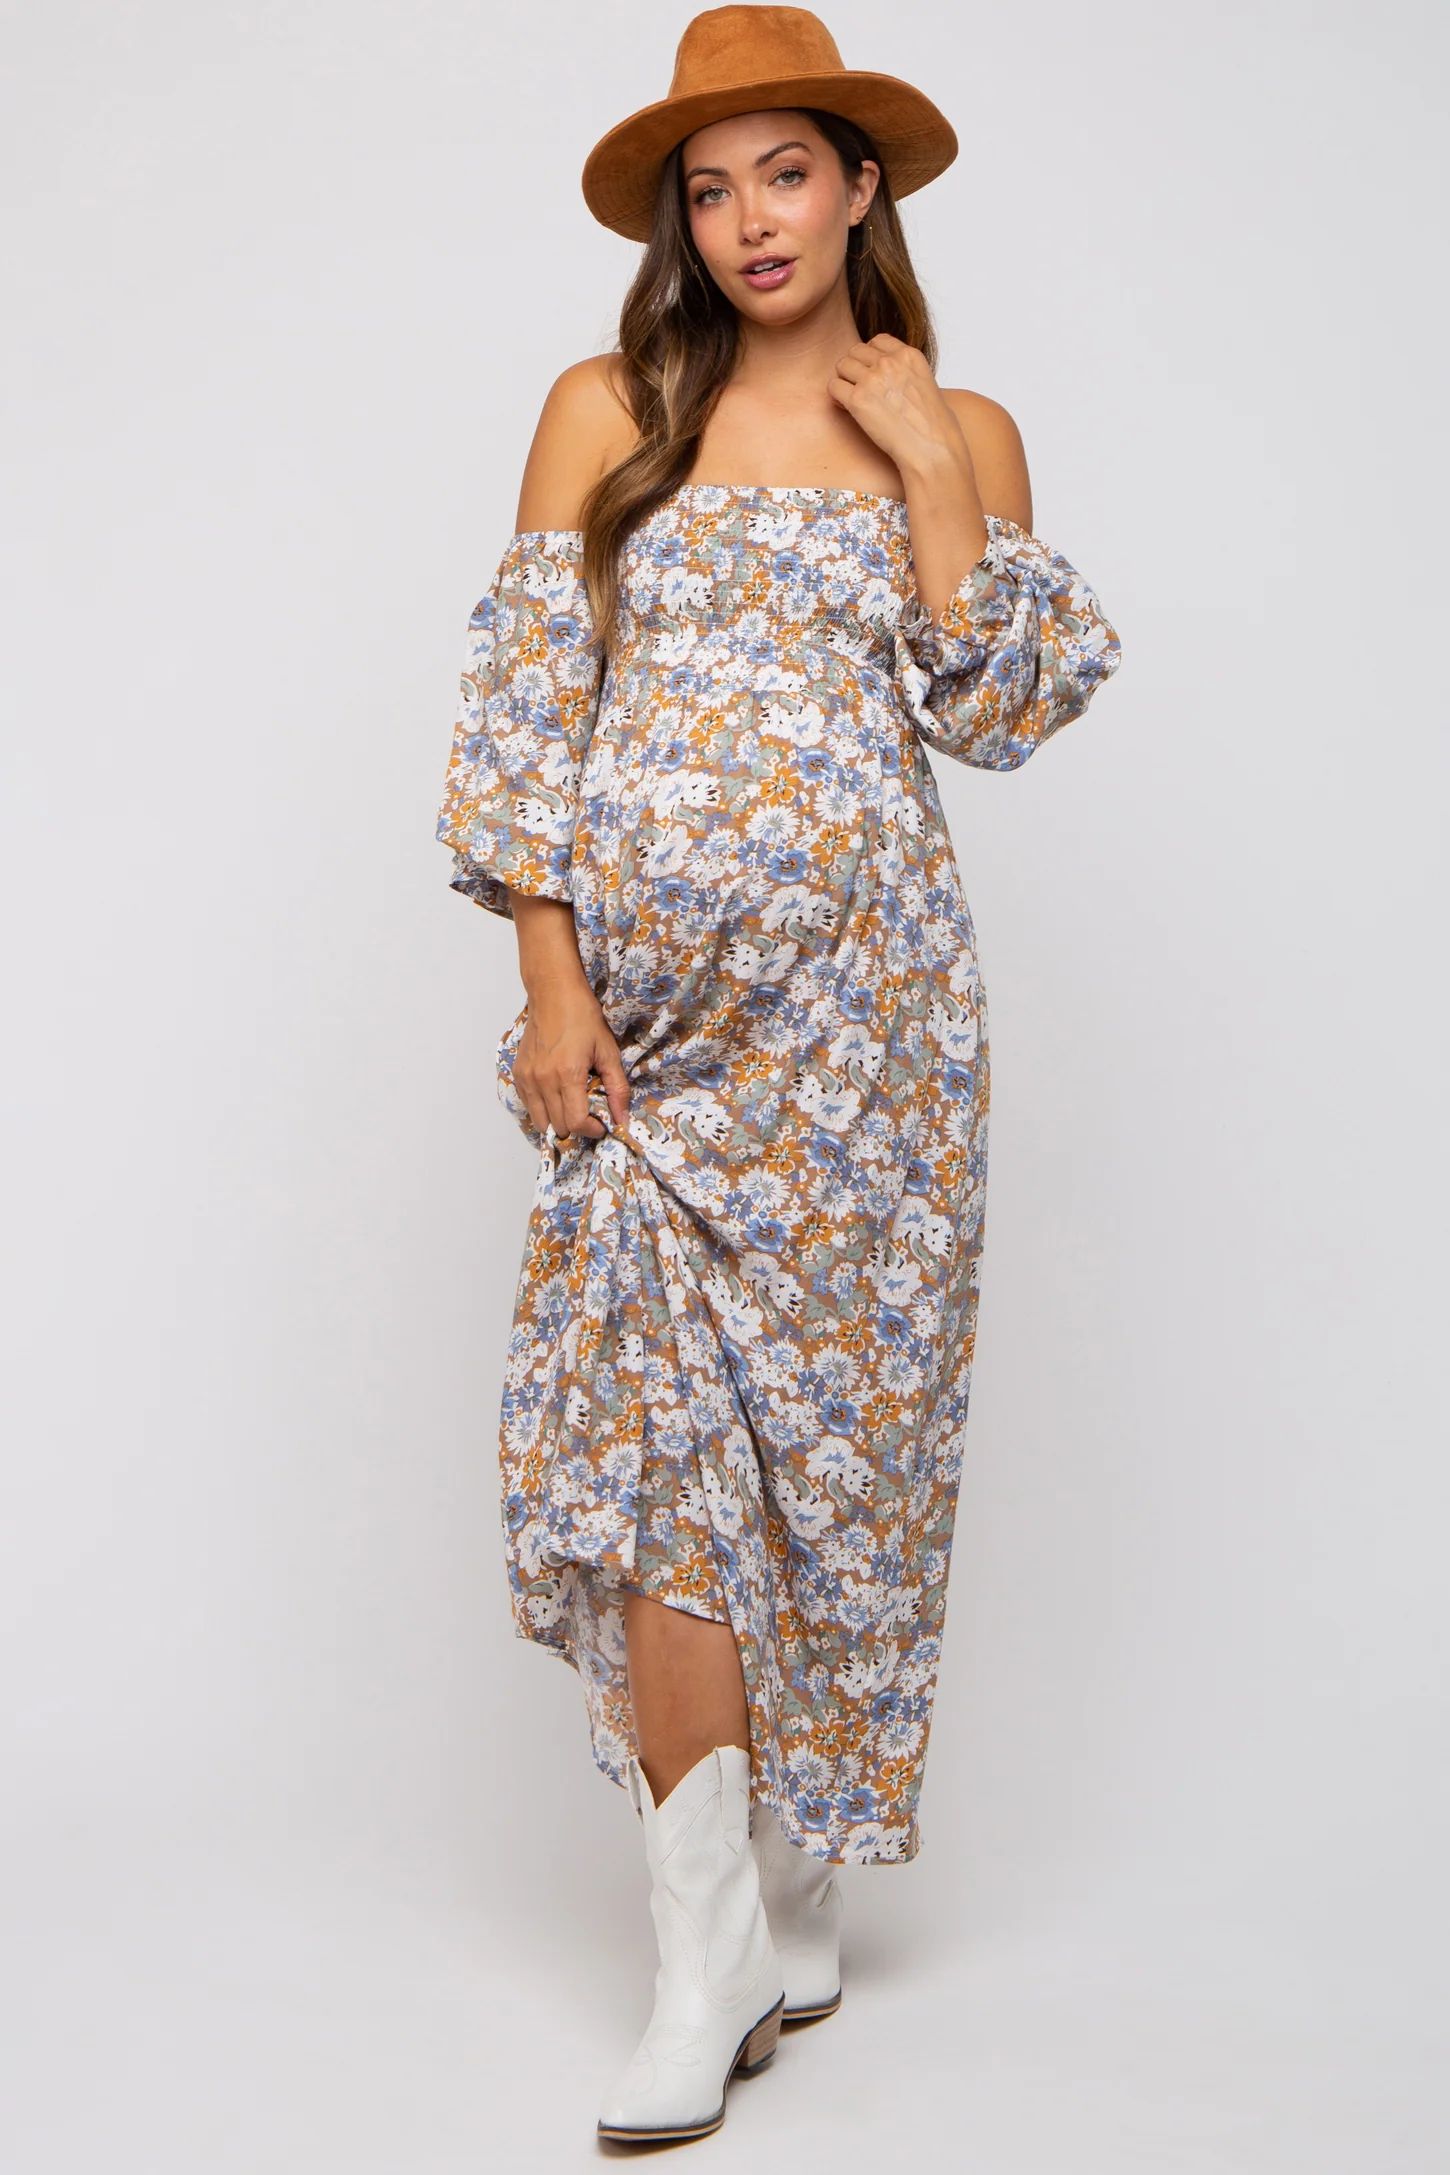 Taupe Floral Print Off Shoulder Smocked Maternity Maxi Dress | PinkBlush Maternity